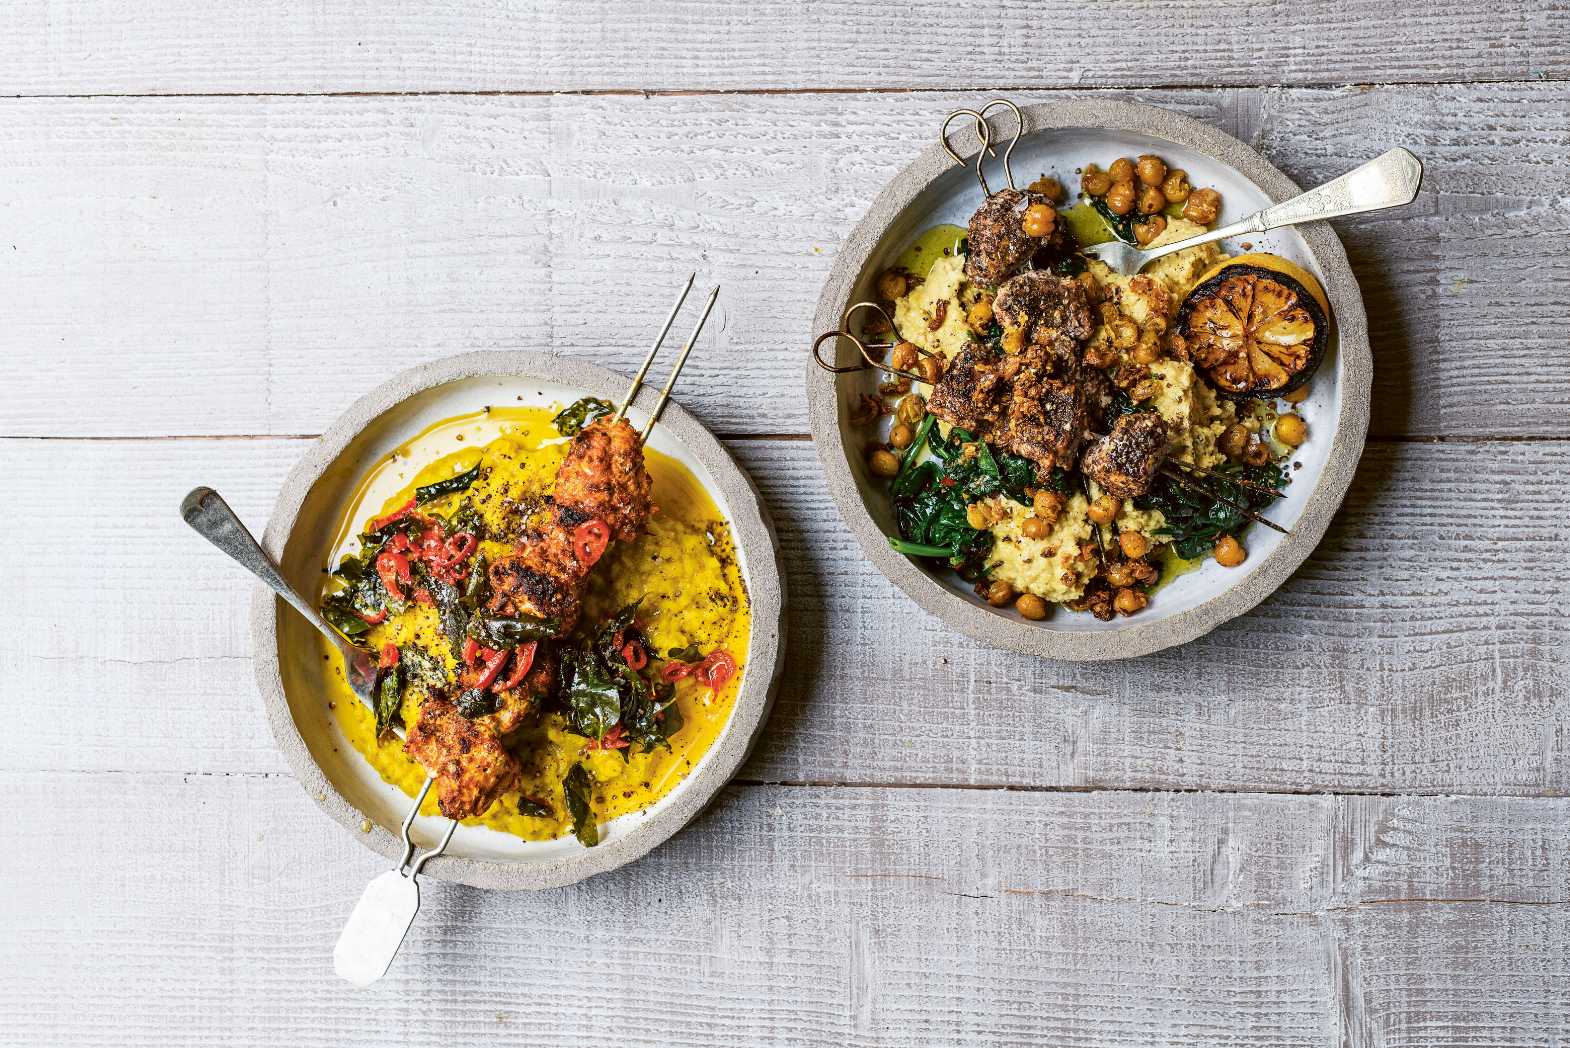 Monkfish Sumac Skewers with Warm Chickpea Purée, Spinach and Burnt Lemon Recipe